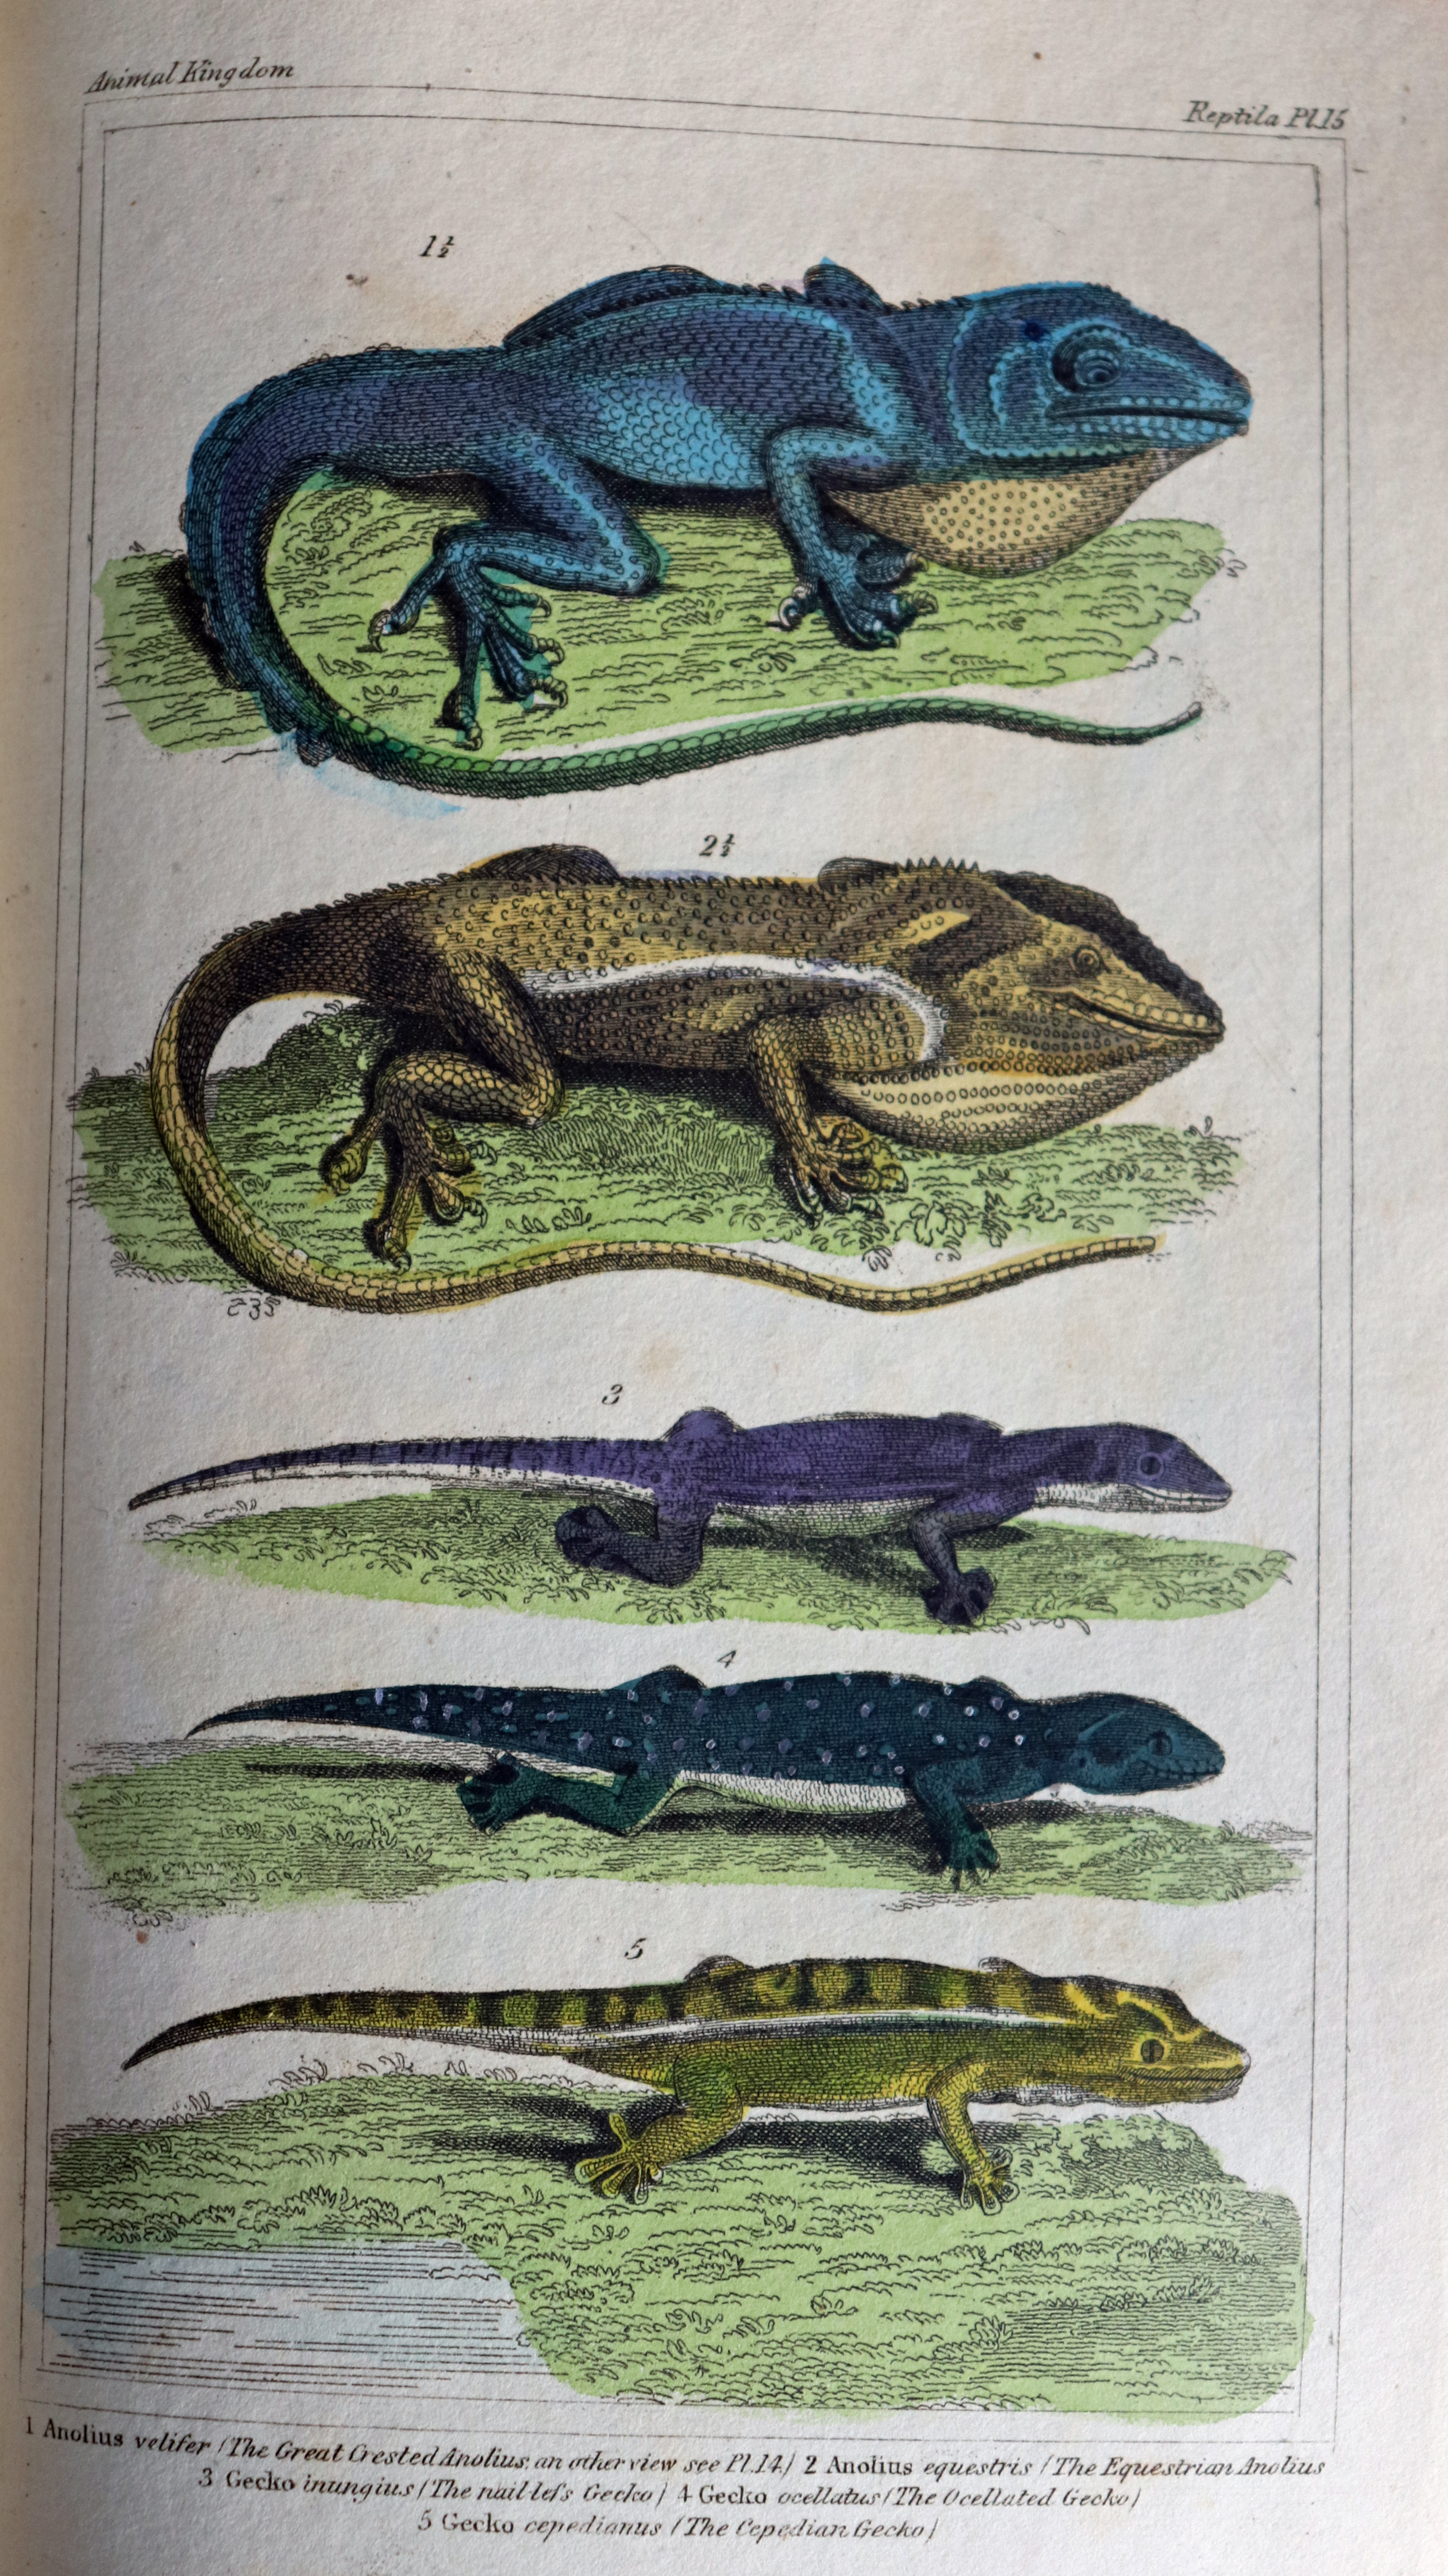 zoology library archive image - Cuvier Lizards: Plate 15. Colour plate depicting two species of iguana and three species of gecko.  Plate 19. Colour plate of Ophryessa superciliosa (Diving lizard) and Lyriocephalus margaritaceus (Hump nosed lizard) accompanied by line drawings of some of their features.